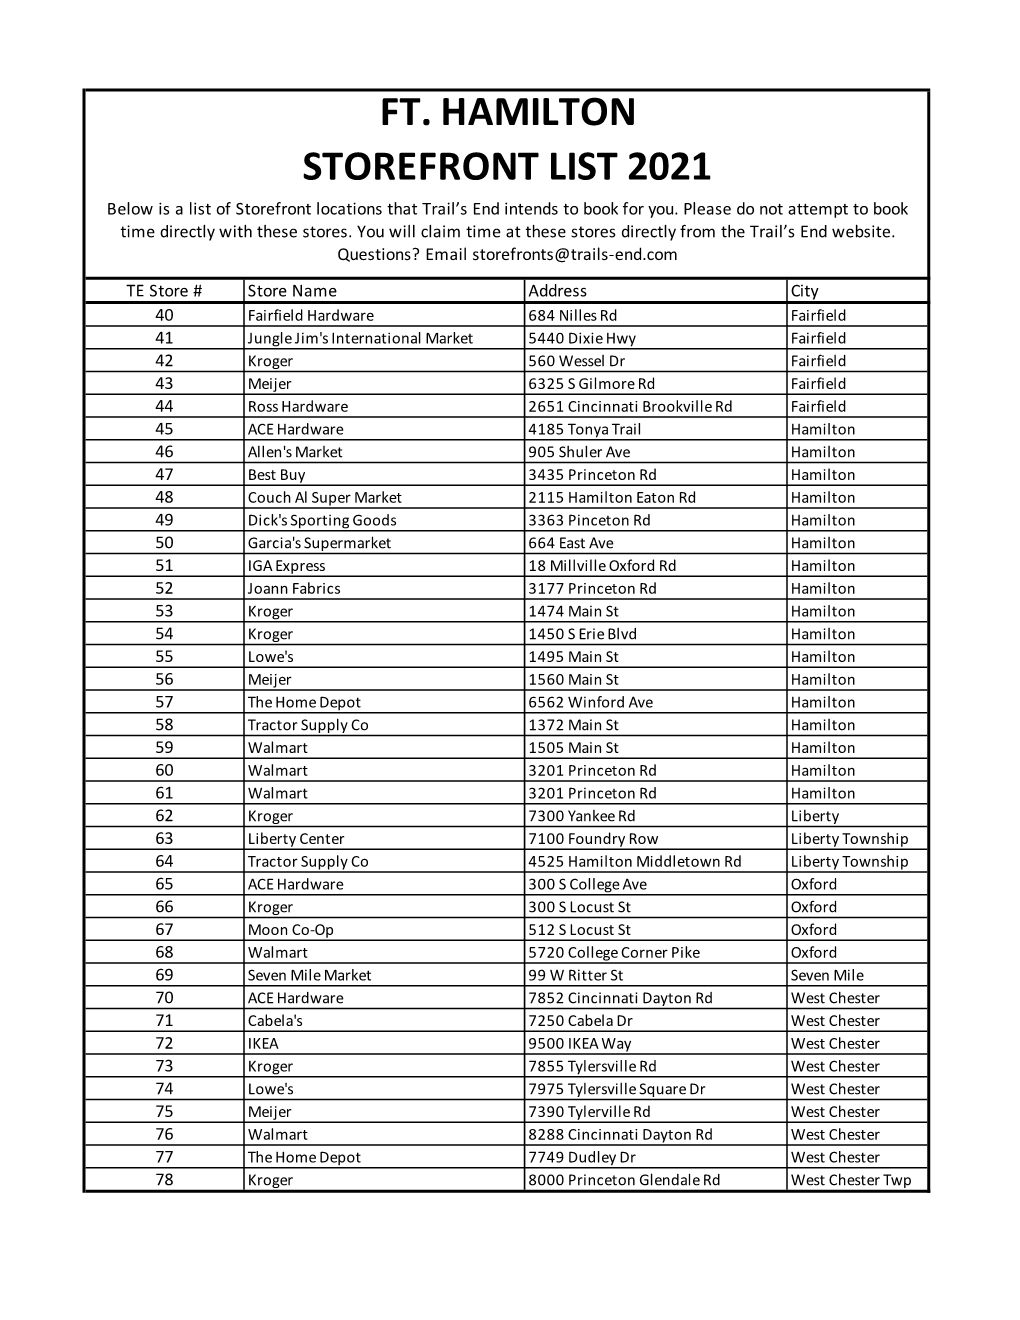 FT. HAMILTON STOREFRONT LIST 2021 Below Is a List of Storefront Locations That Trail’S End Intends to Book for You